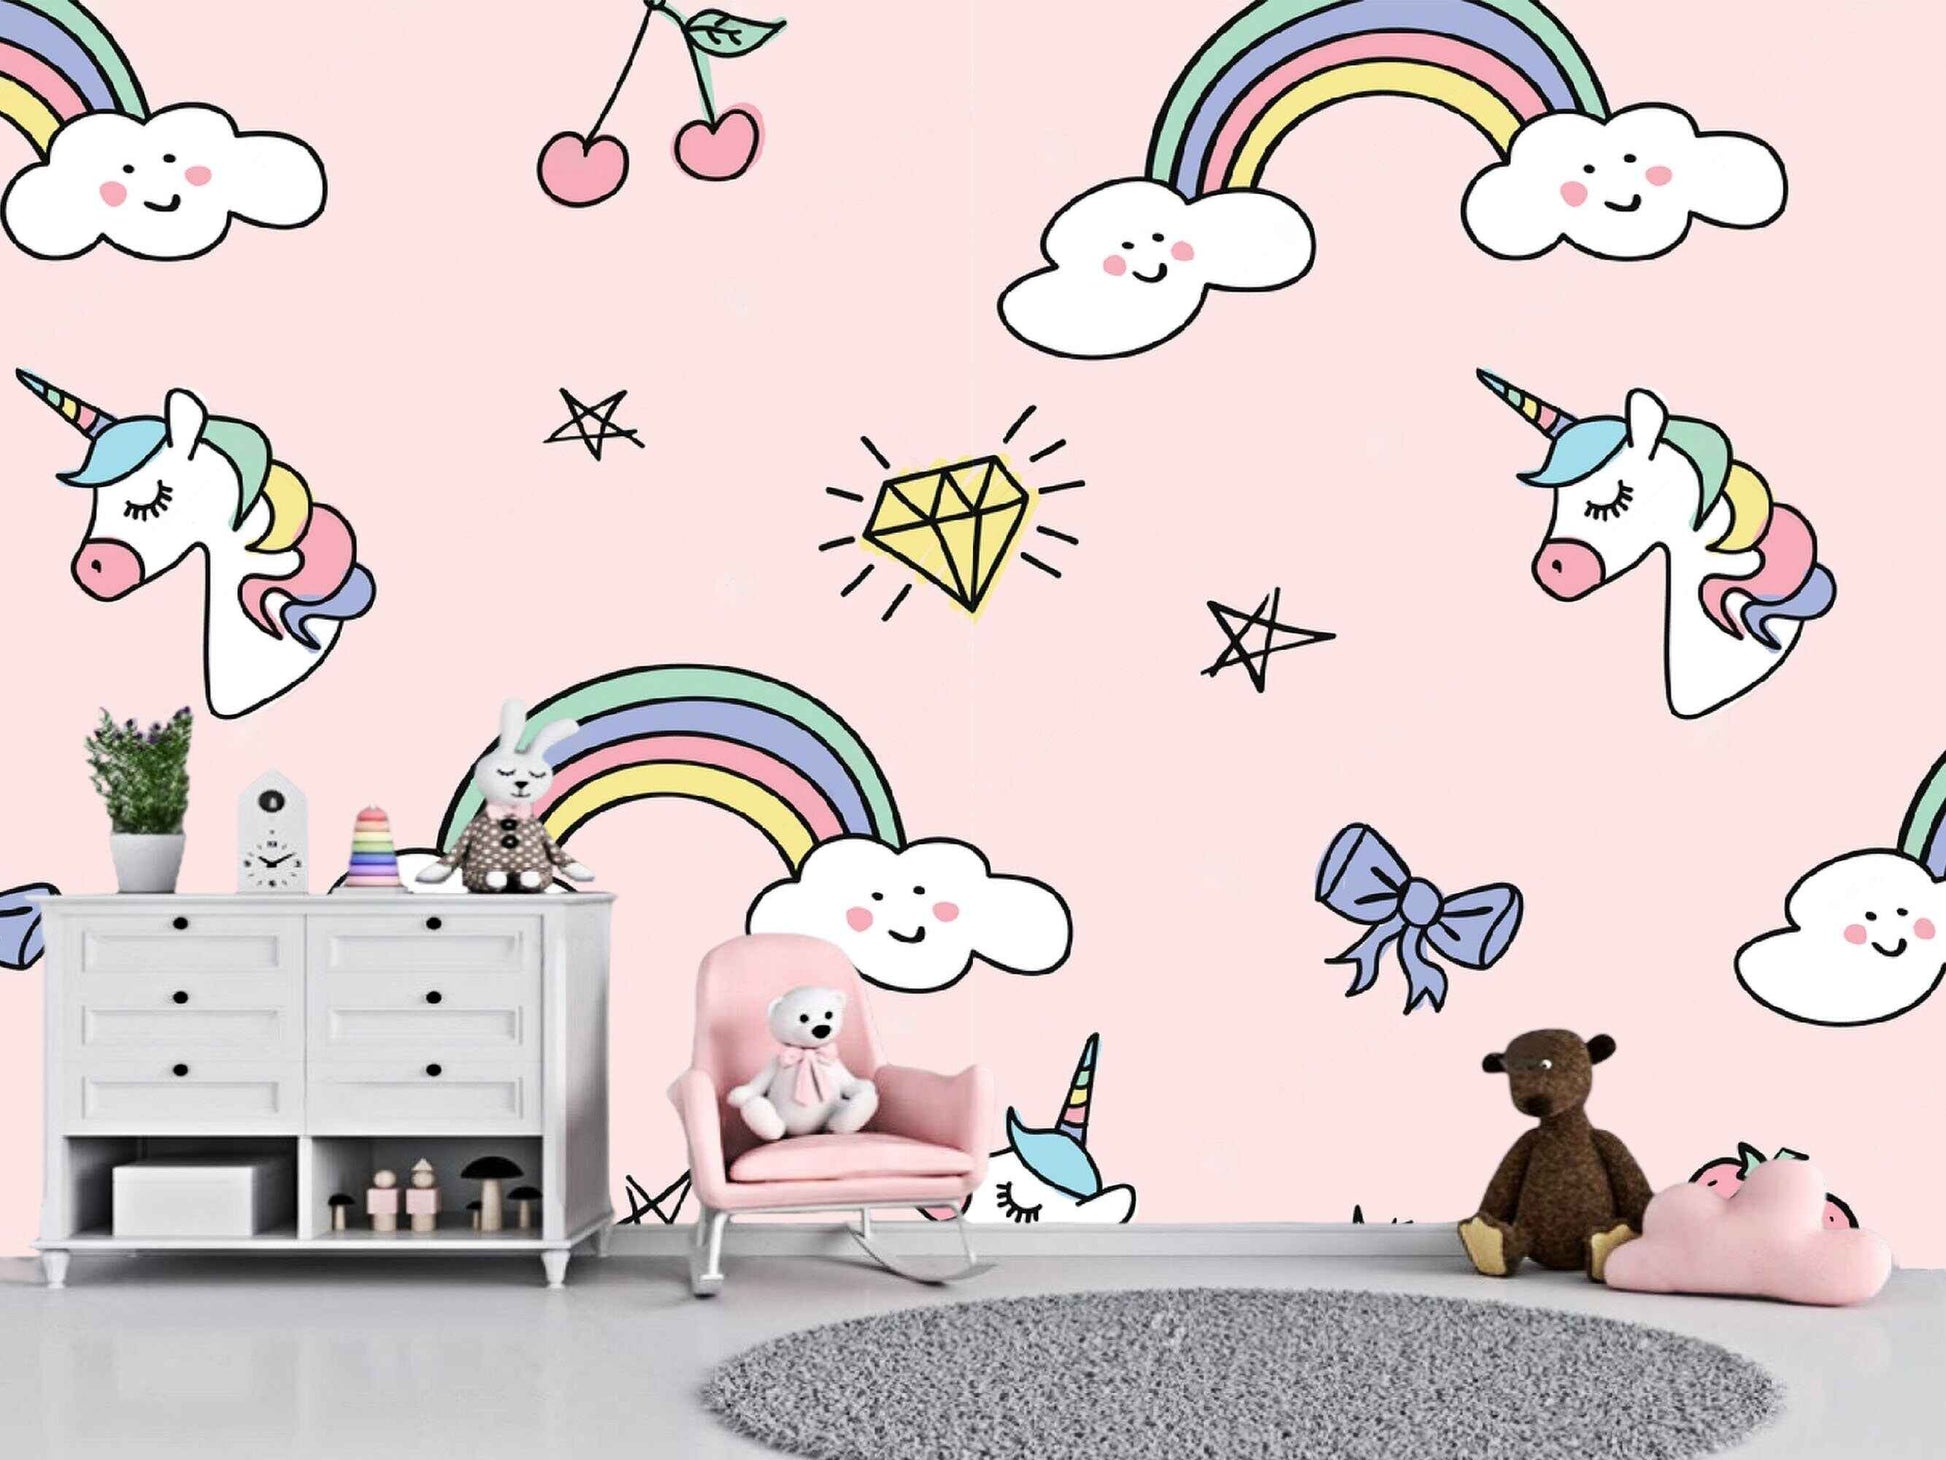 Playful nursery wallpaper designs, stimulating imagination and fostering creativity in the room.